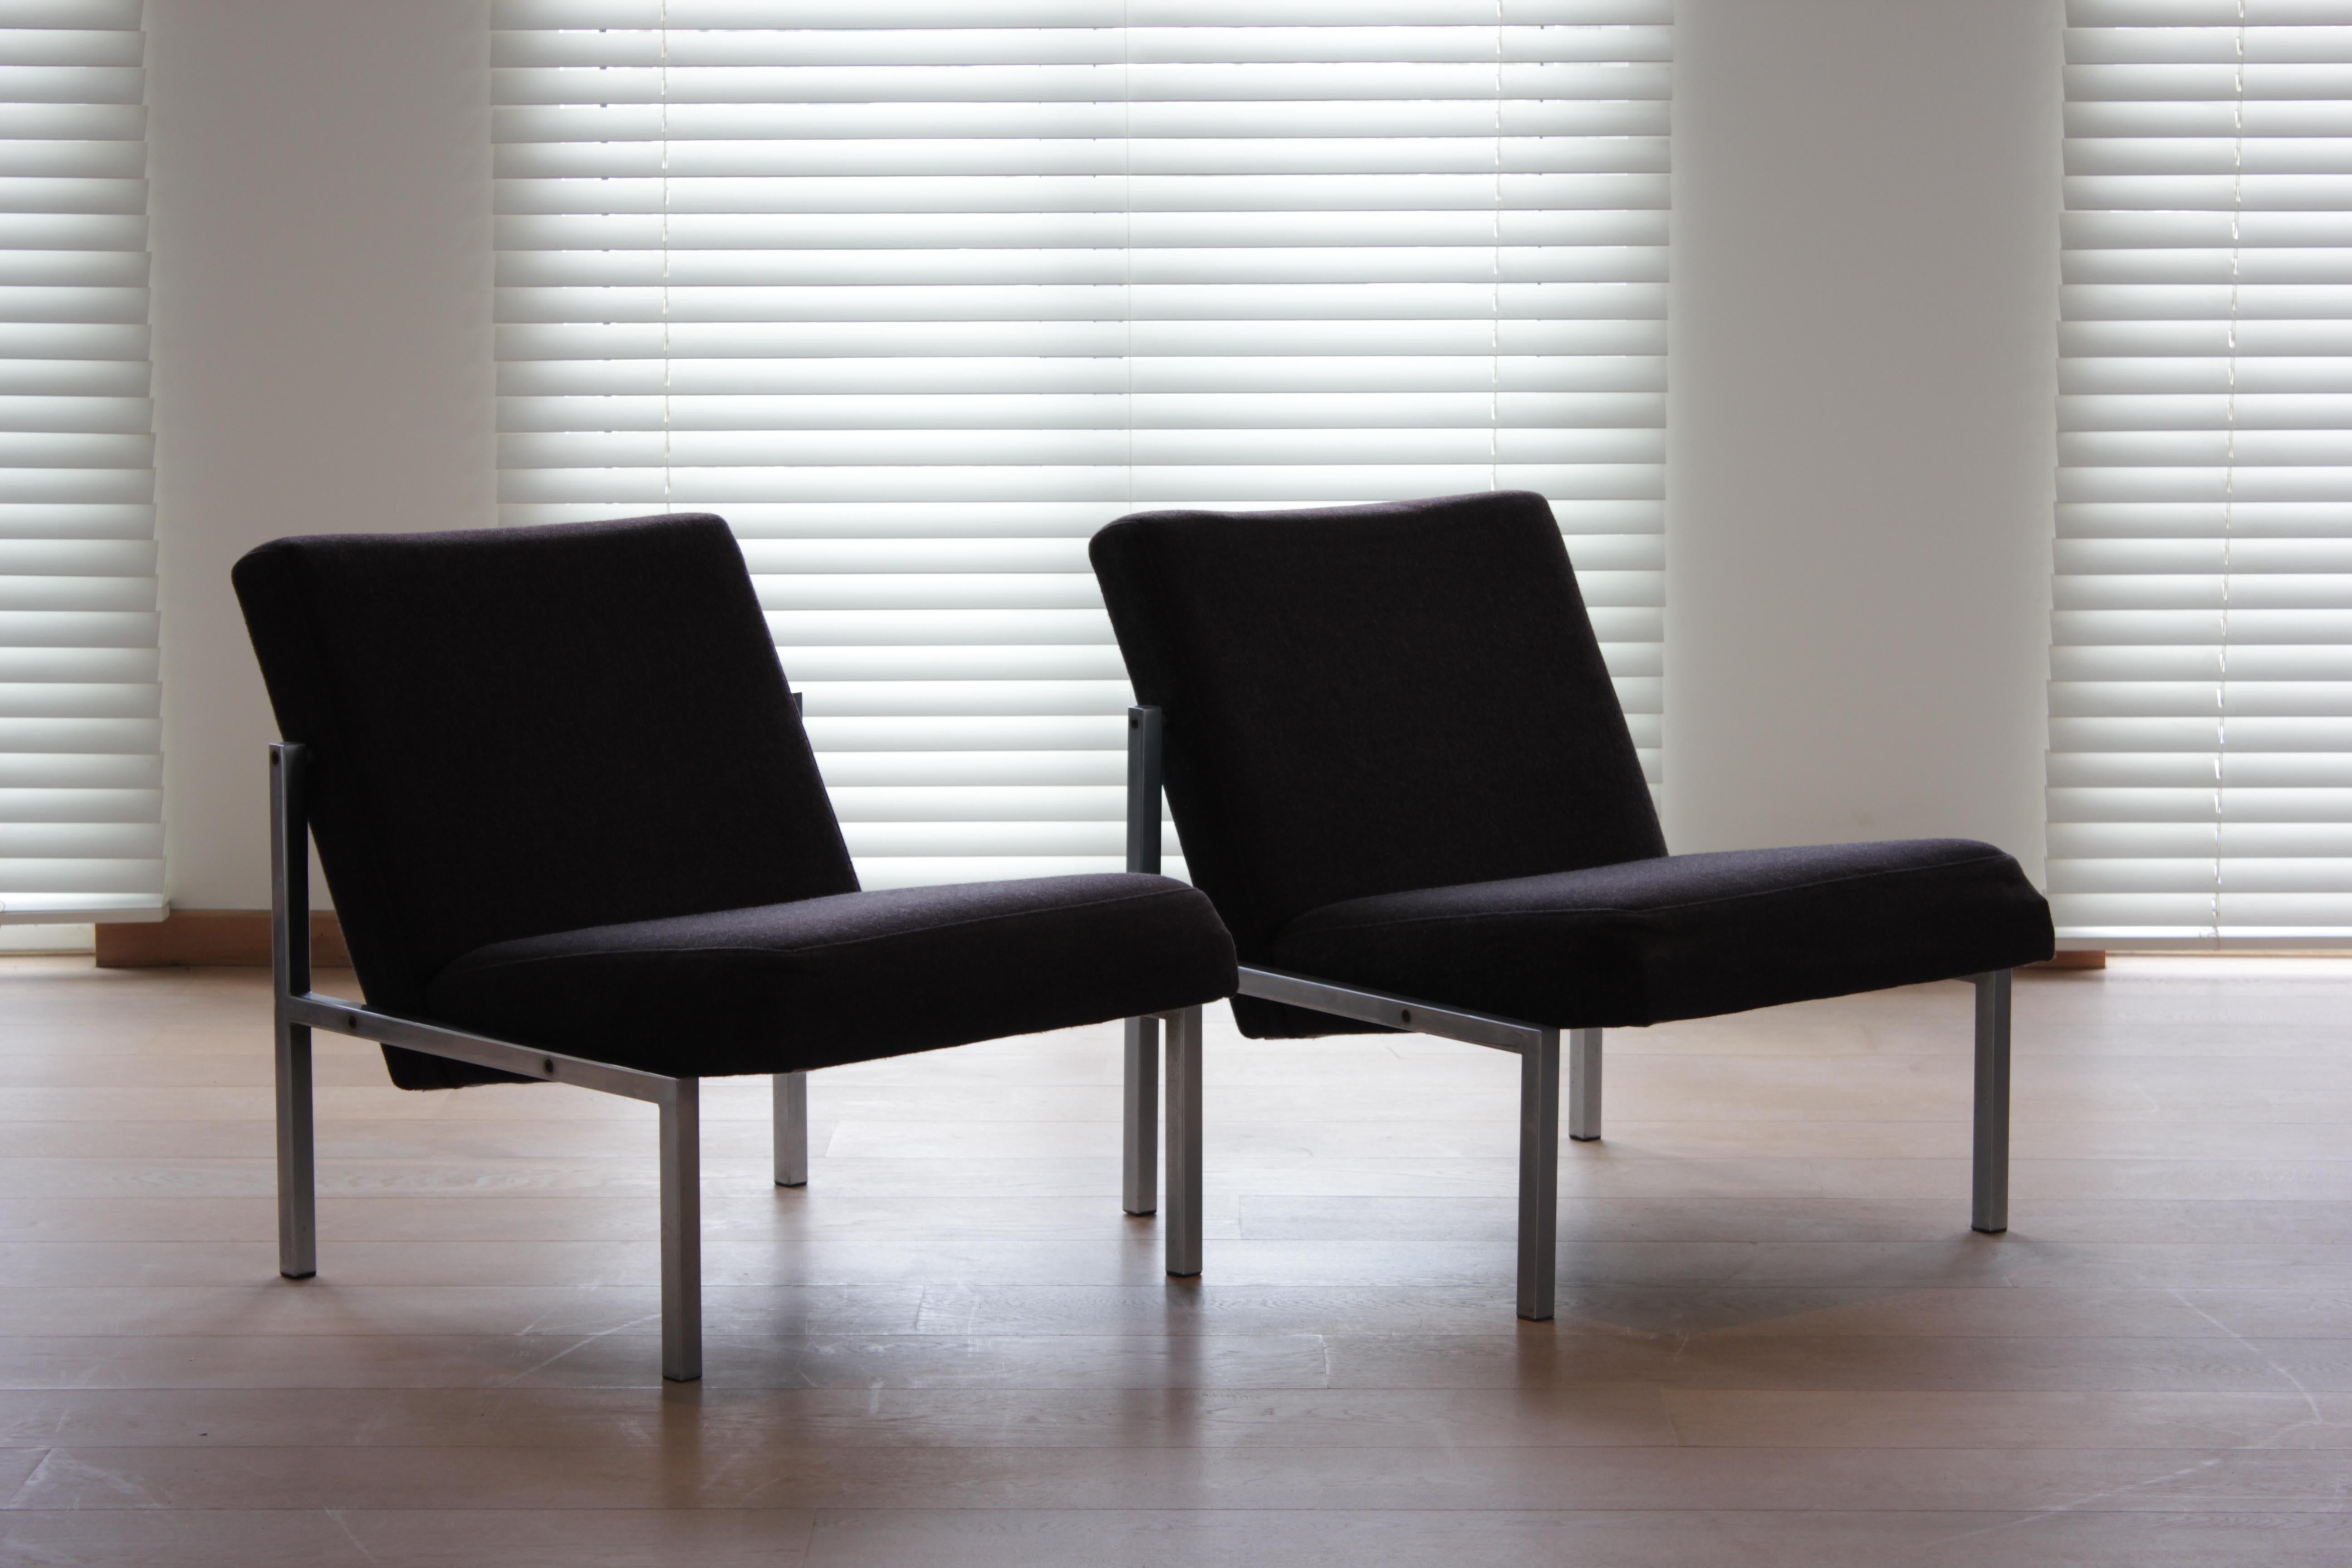 Dutch Pair of SZ11 Lounge Chairs by Martin Visser for 't Spectrum, 1960s For Sale